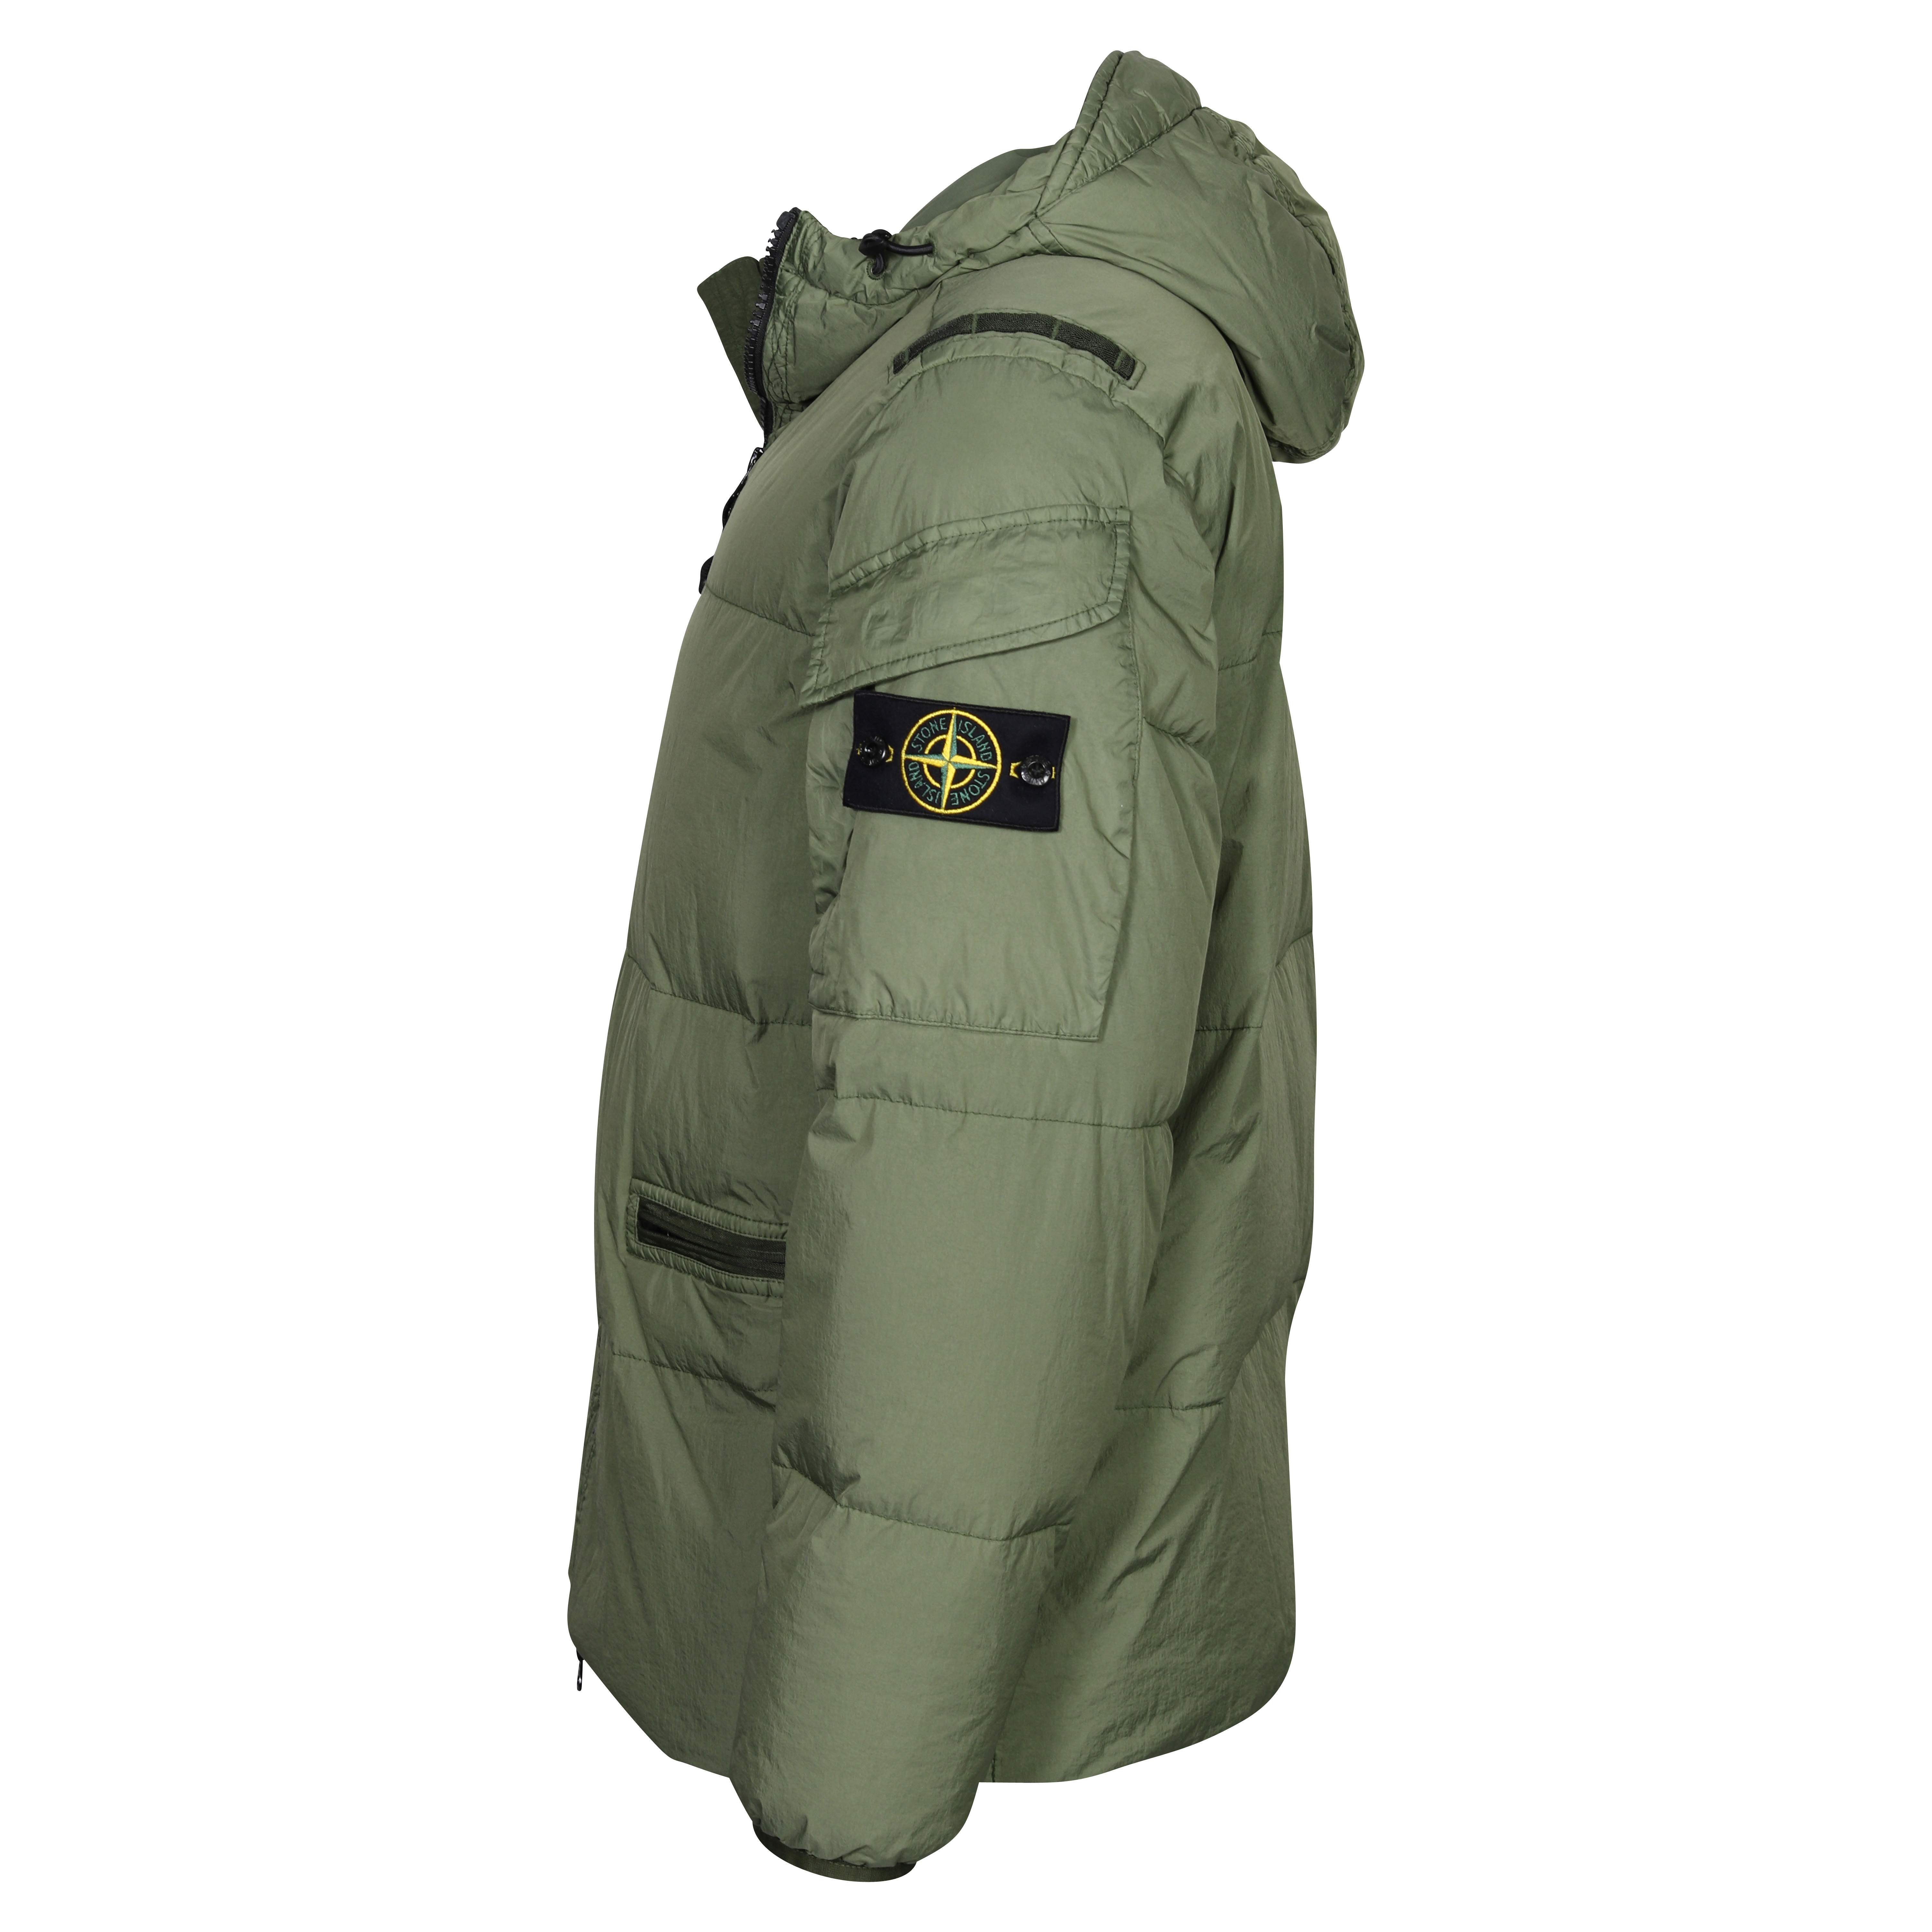 Stone Island Garment Dyed Crincle Reps Ny Down Jacket in Olive